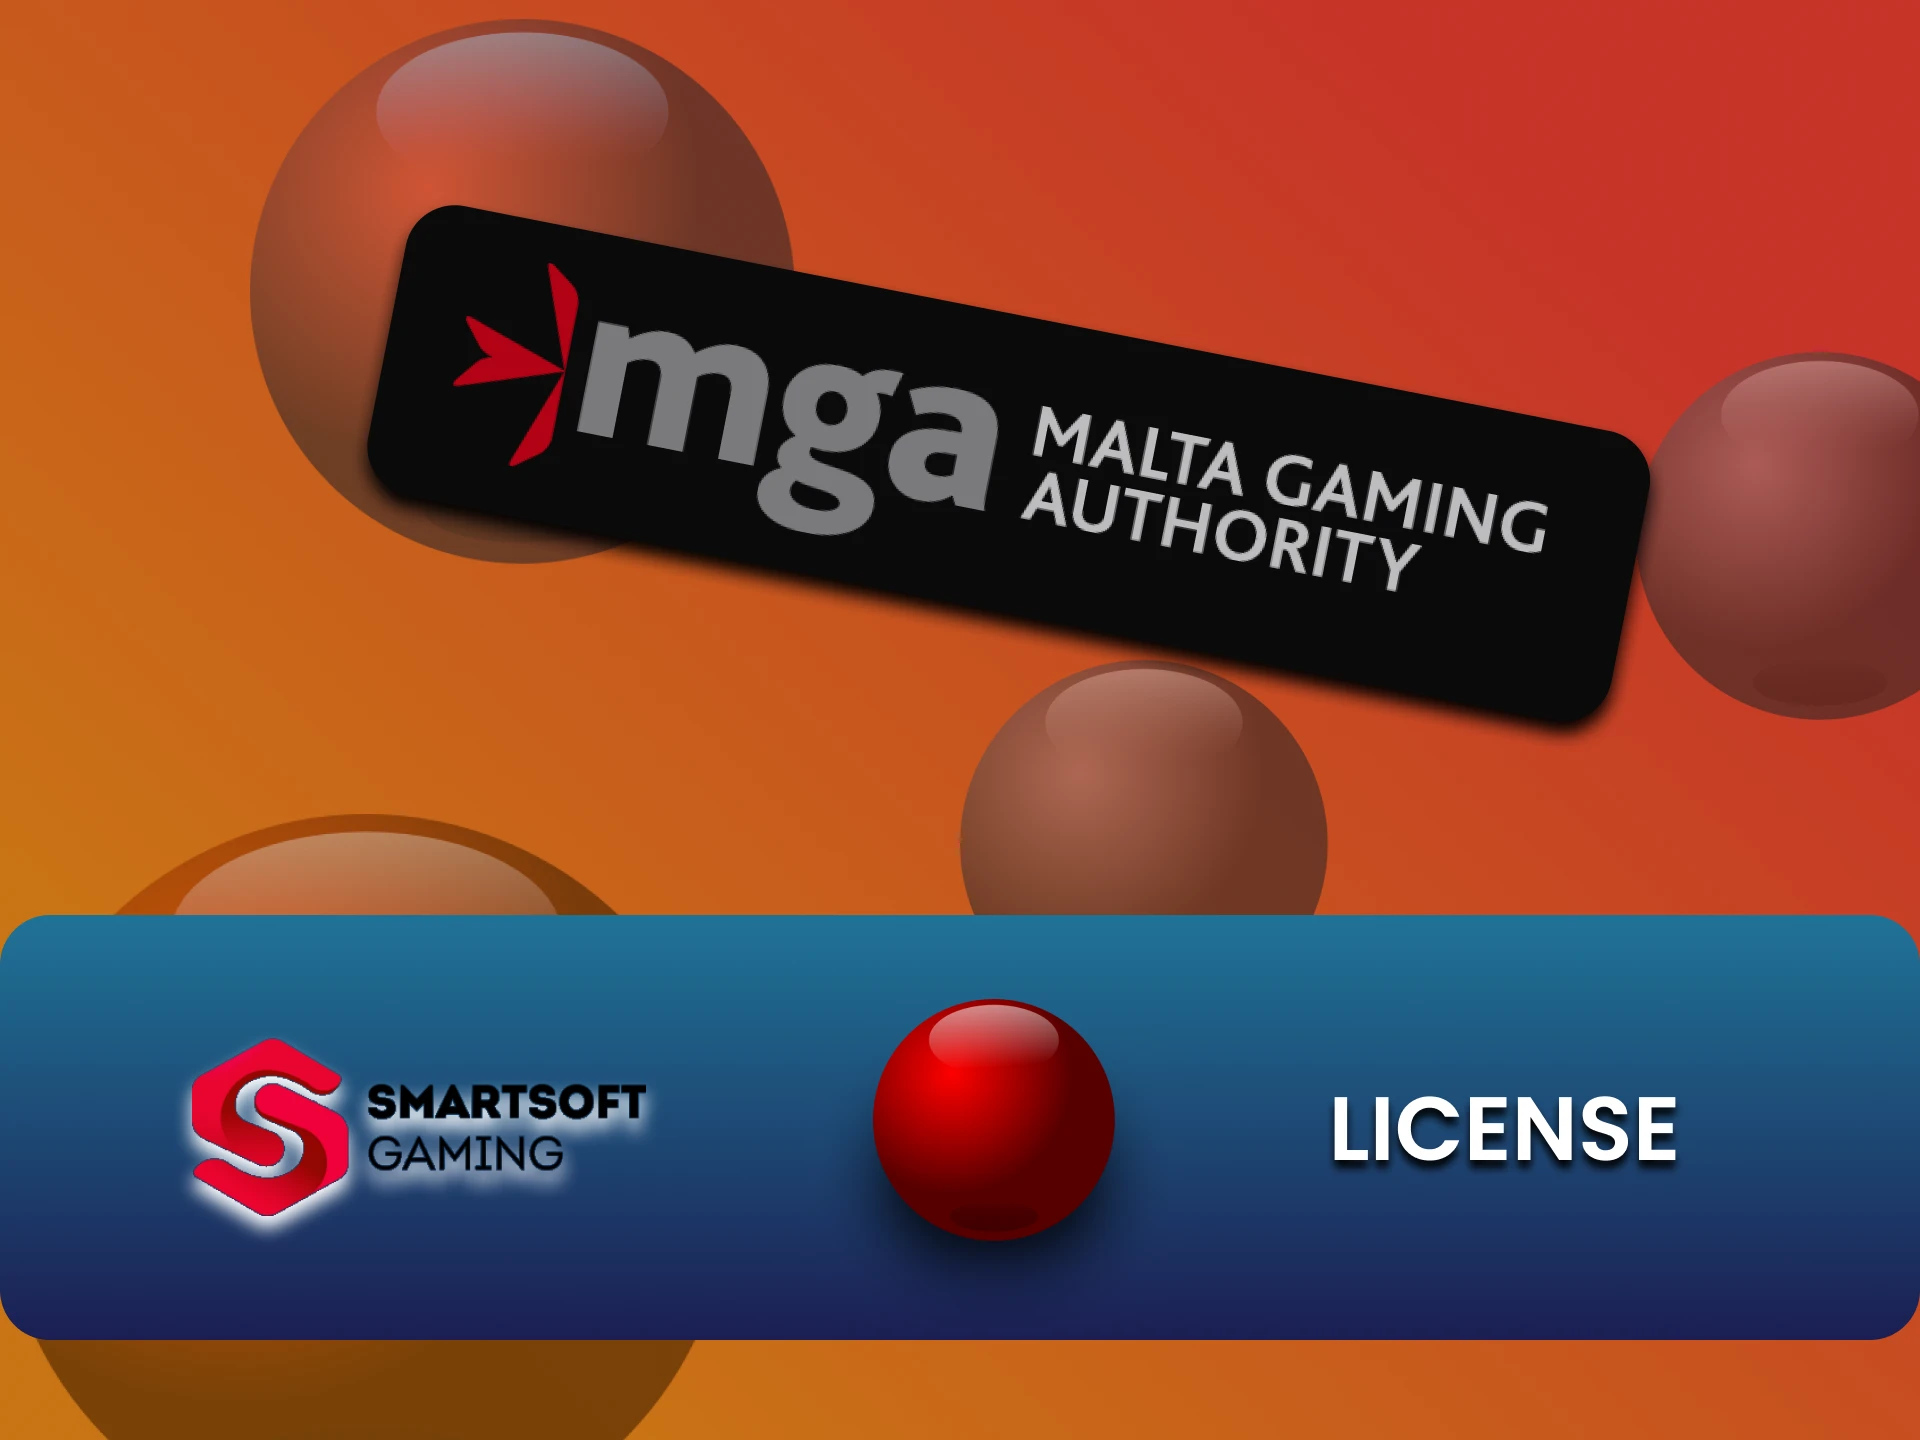 Smartsoft has a special gaming license.